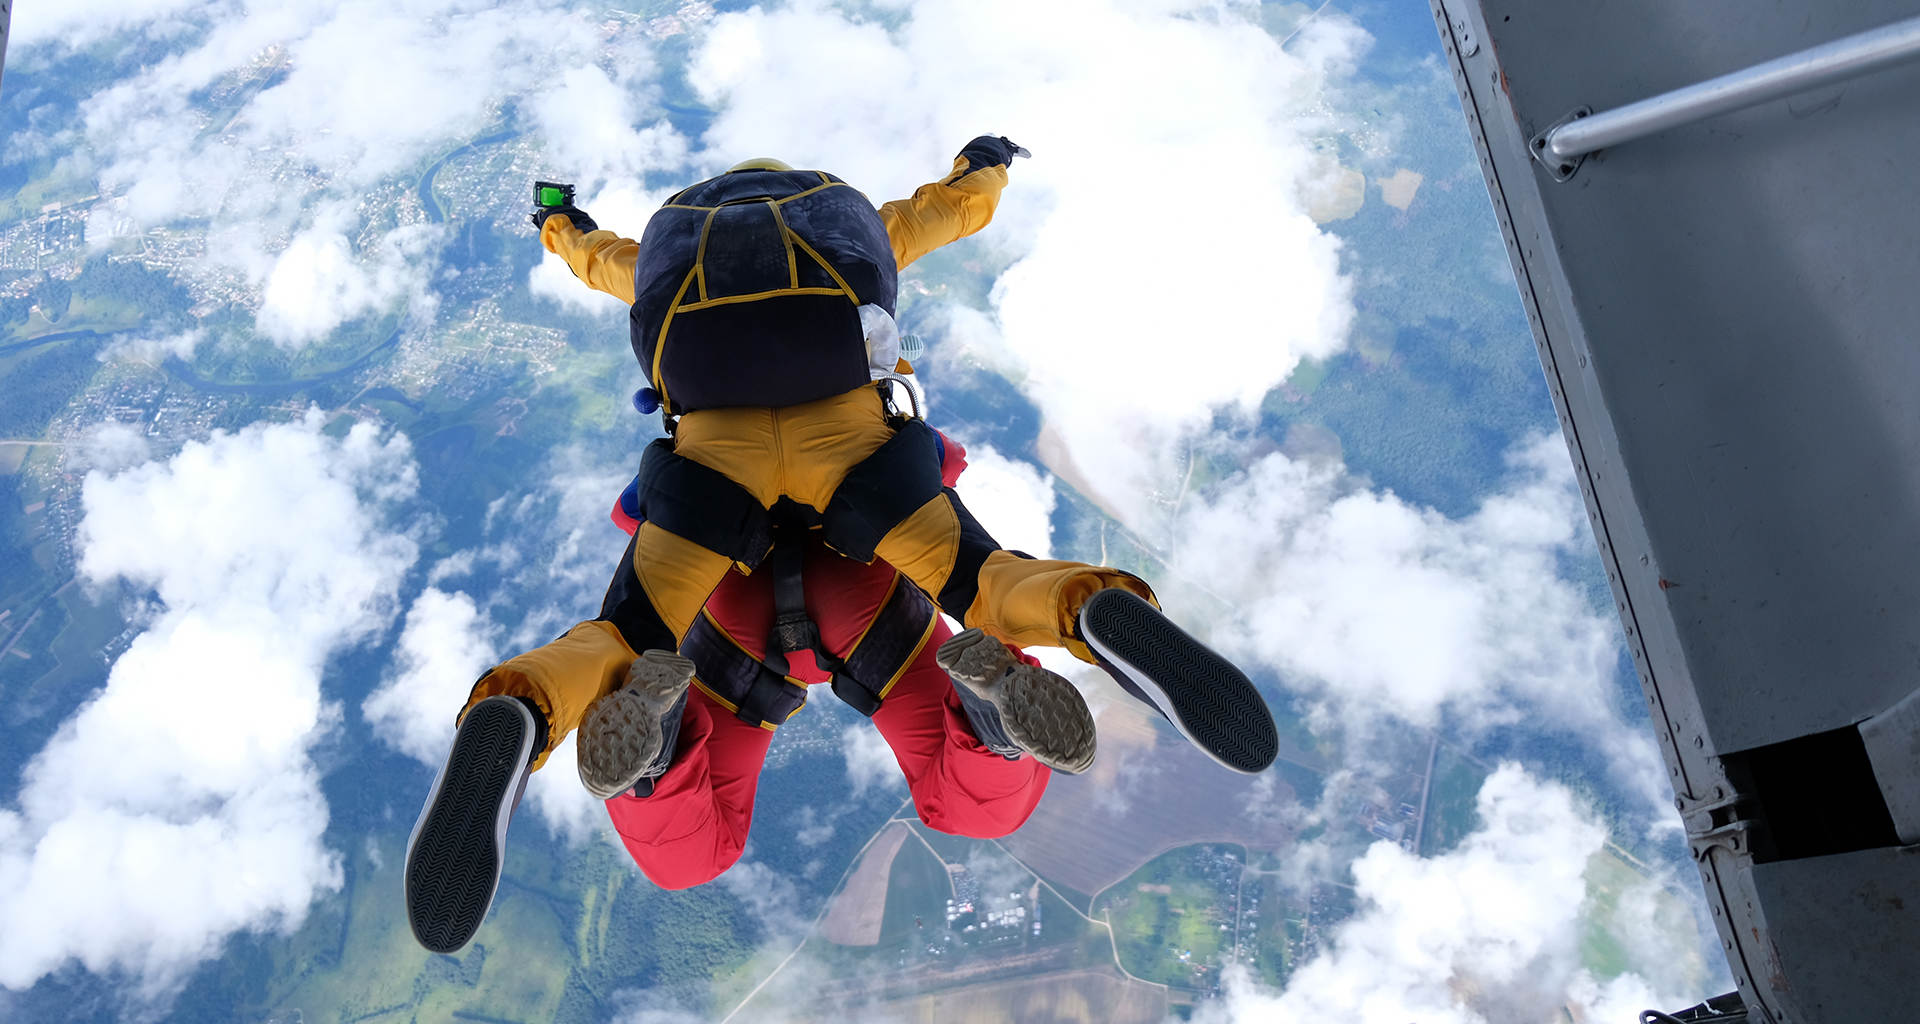 A Thrill Seekers Dream: Top 8 Most Exciting Activities Near Sacramento